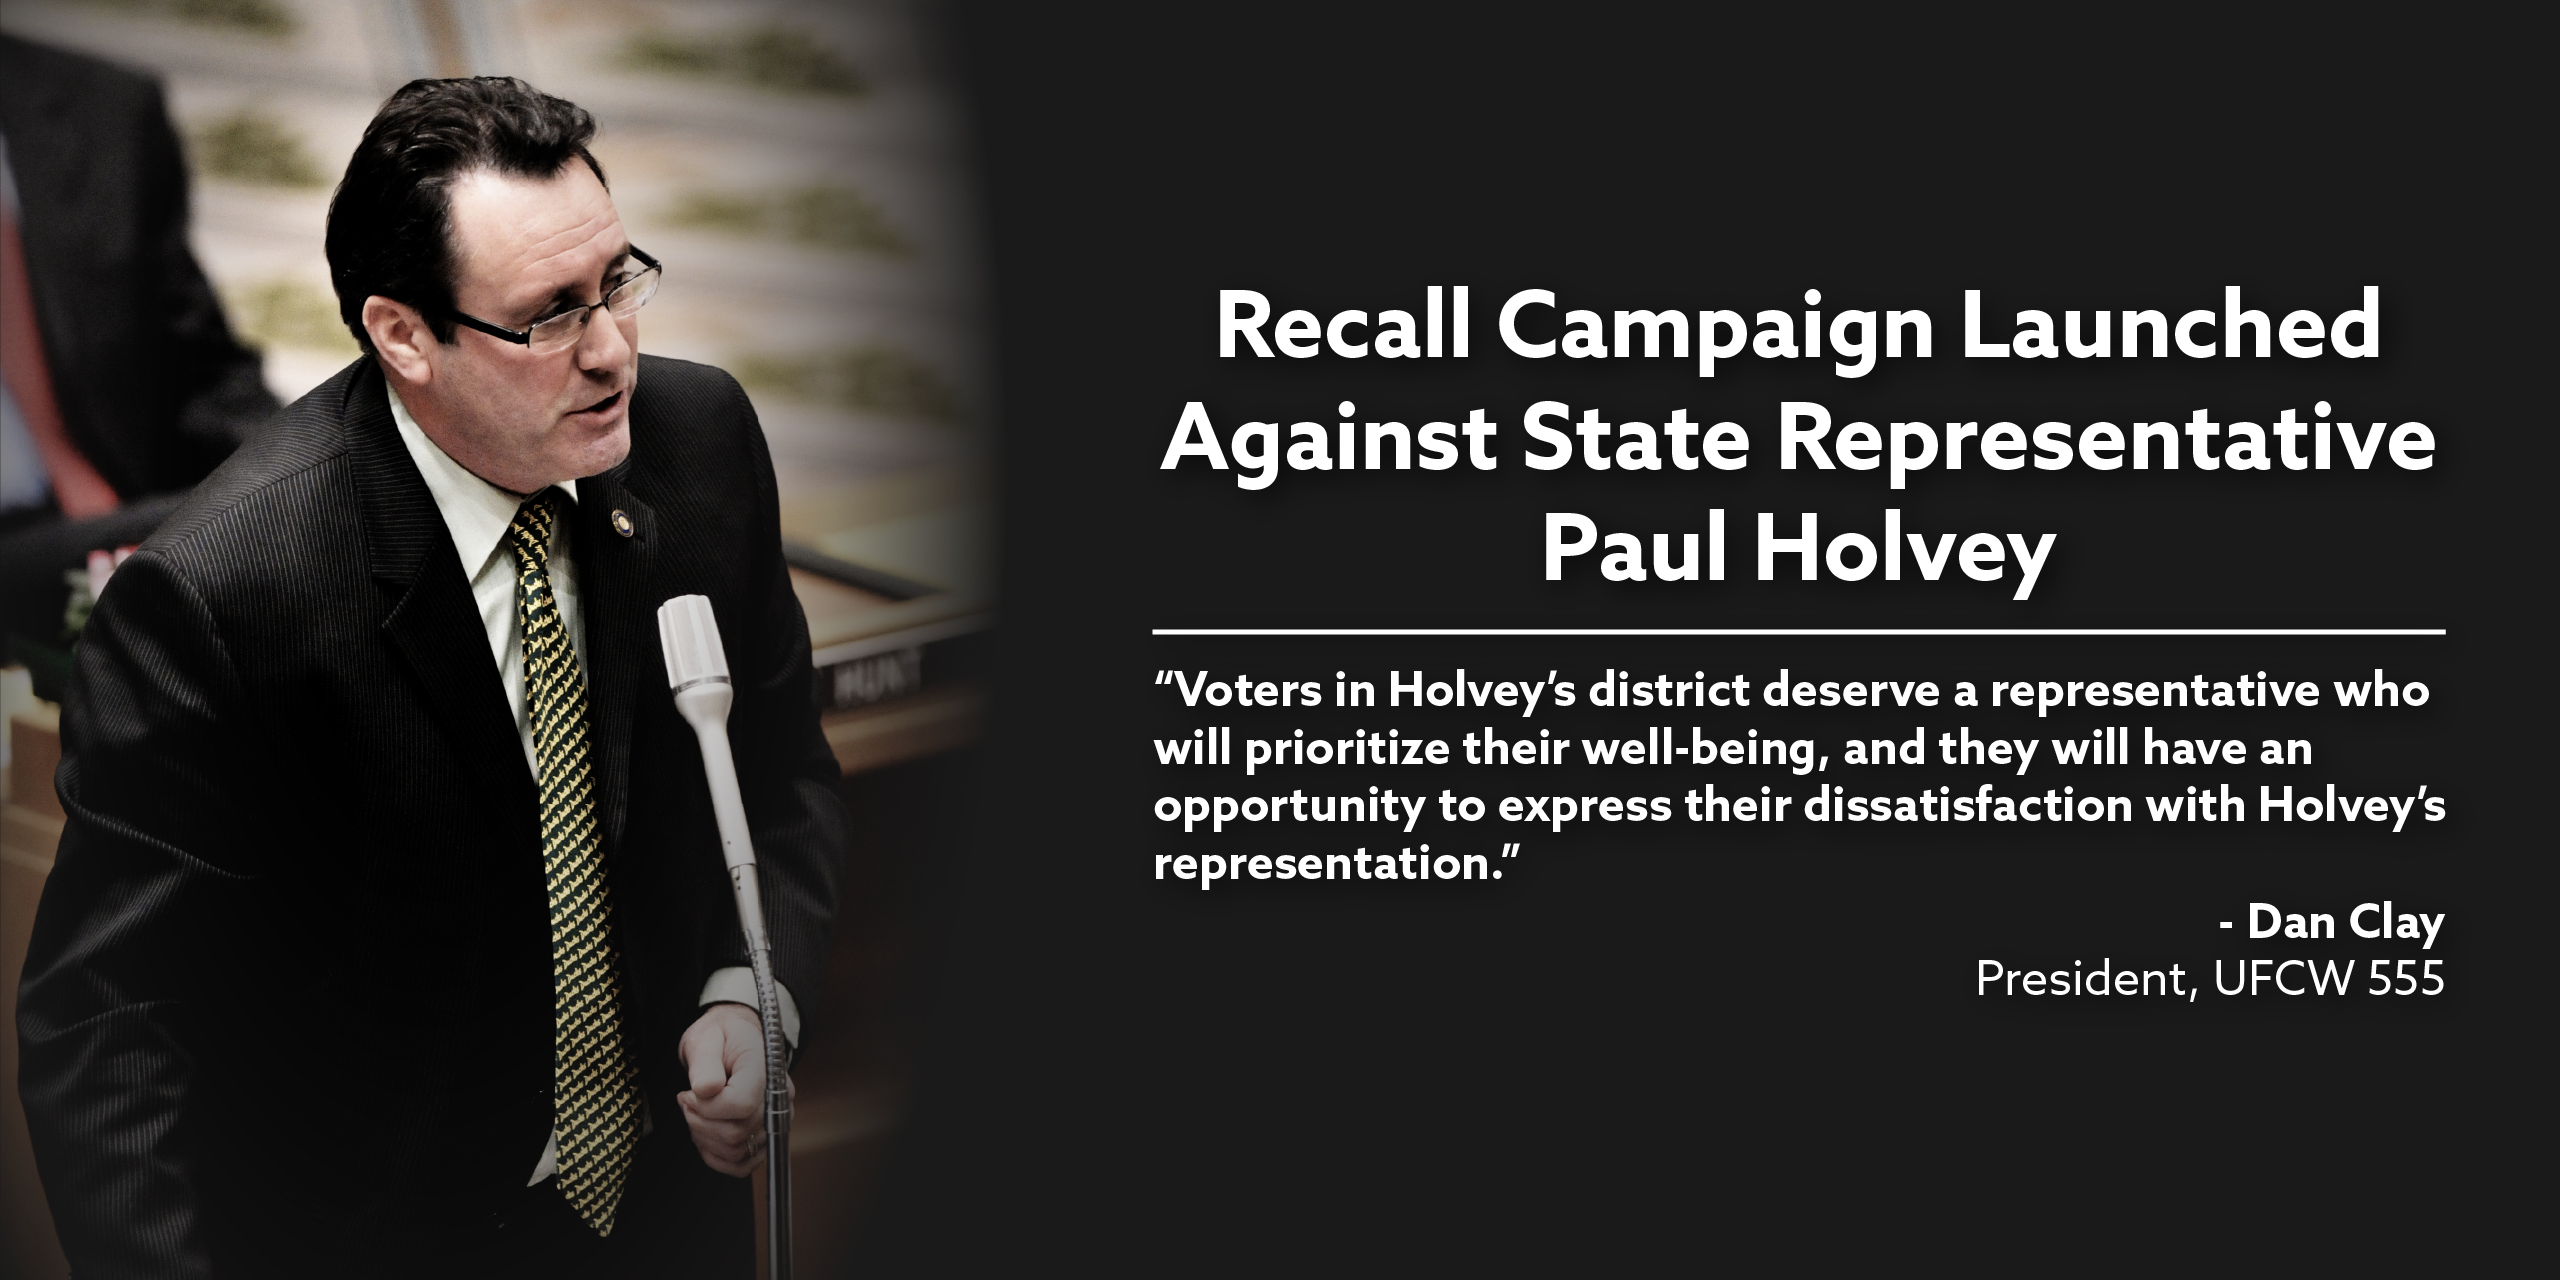 Recall Campaign Launched Against State Representative Paul Holvey. “Voters in Holvey’s district deserve a representative who will prioritize their well-being, and they will have an opportunity to express their dissatisfaction with Holvey’s representation.” - Dan Clay, President UFCW 555